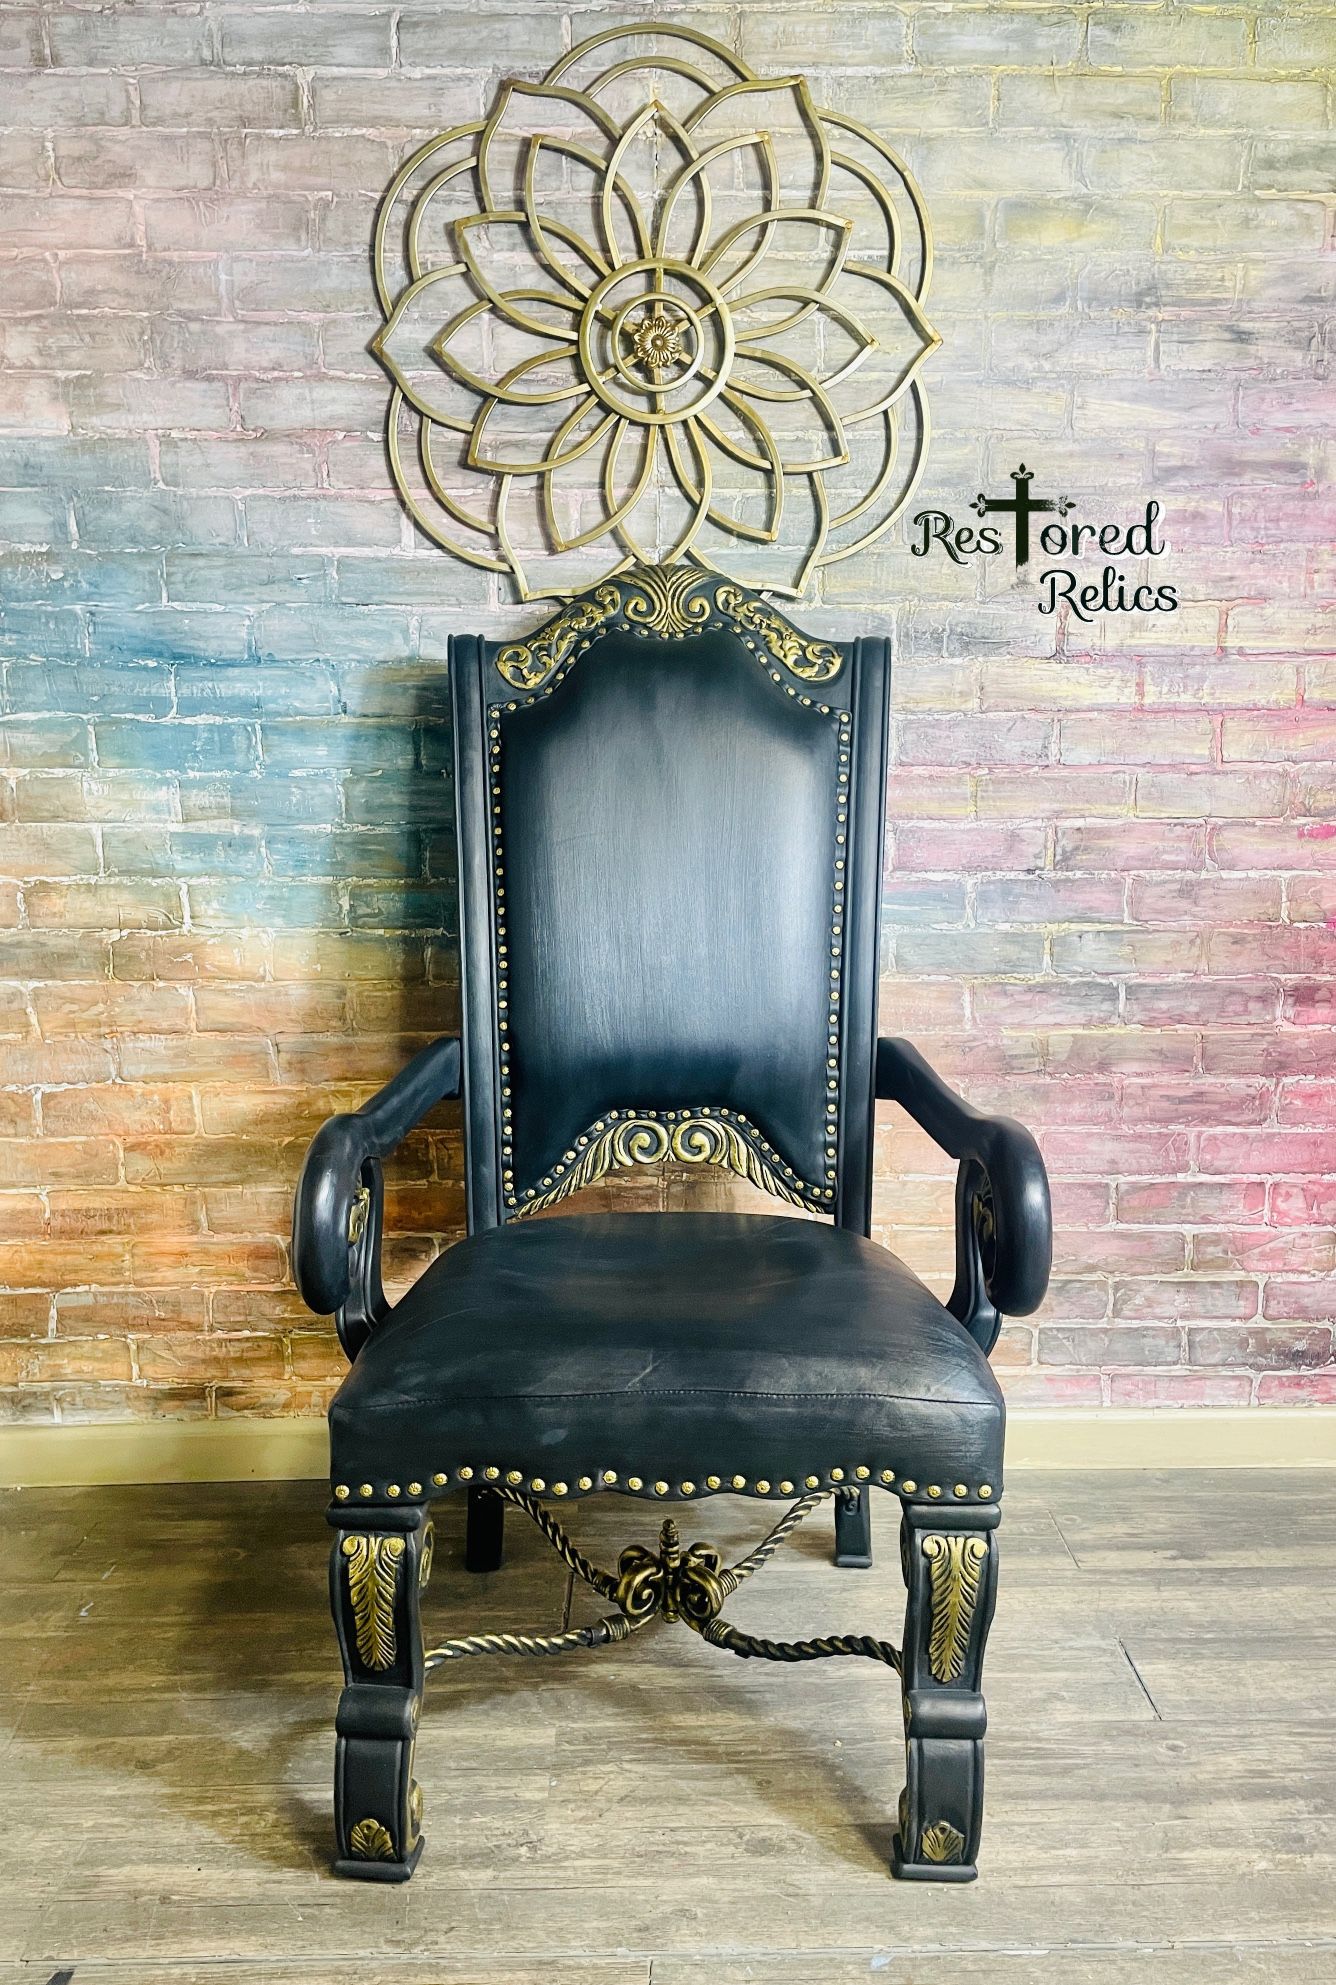 Large Beautiful Ornate, Black, Leather Chair